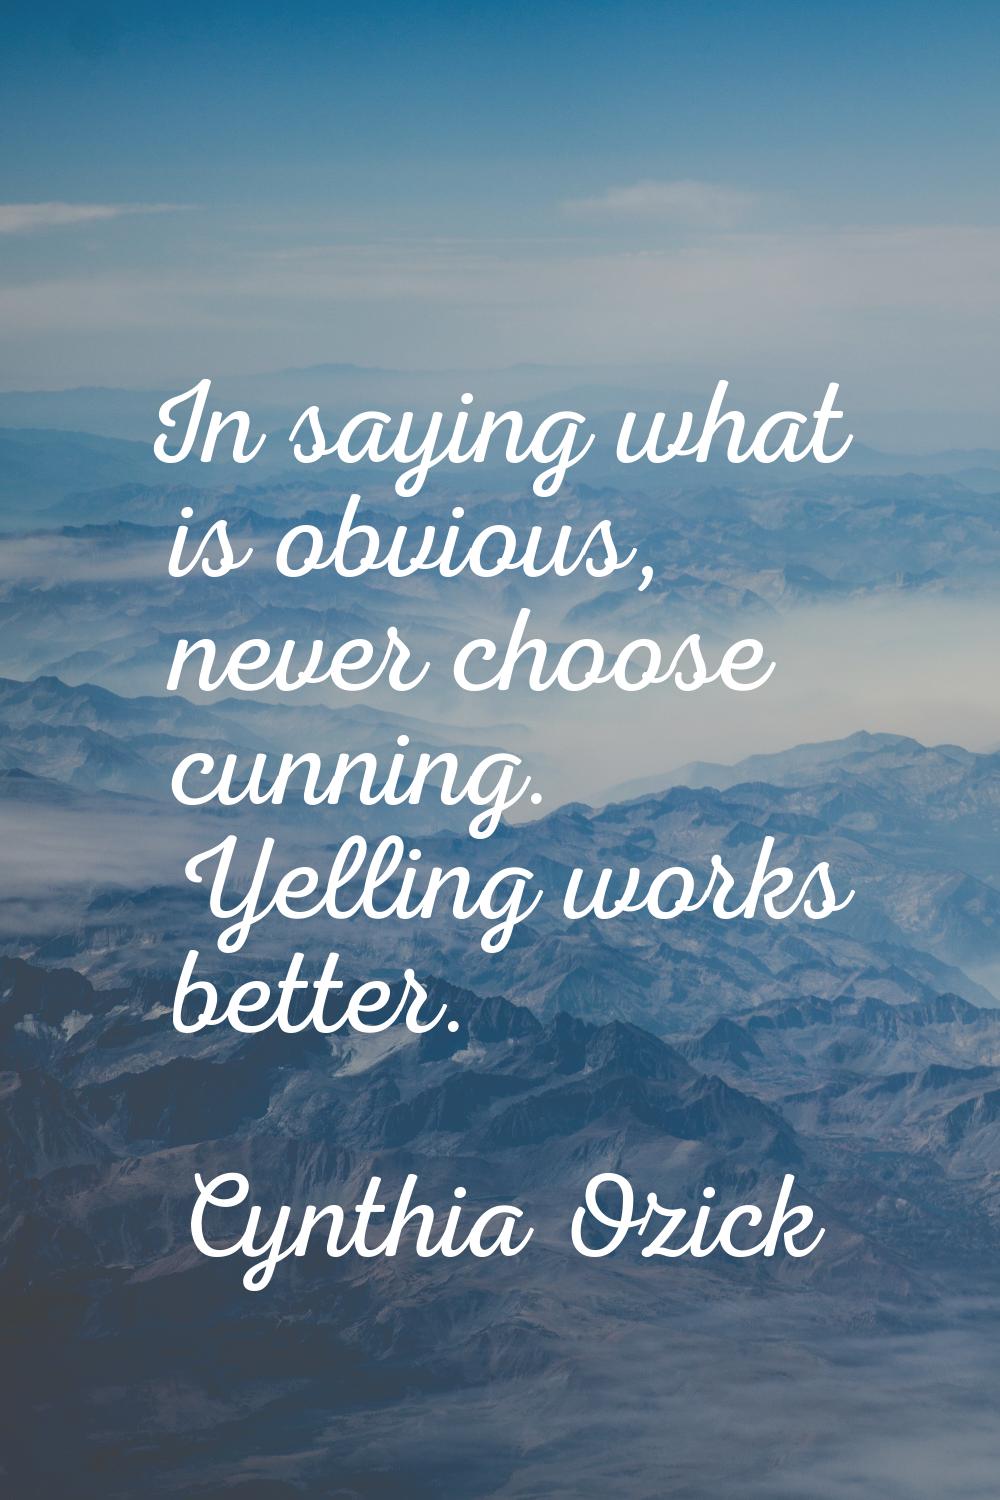 In saying what is obvious, never choose cunning. Yelling works better.